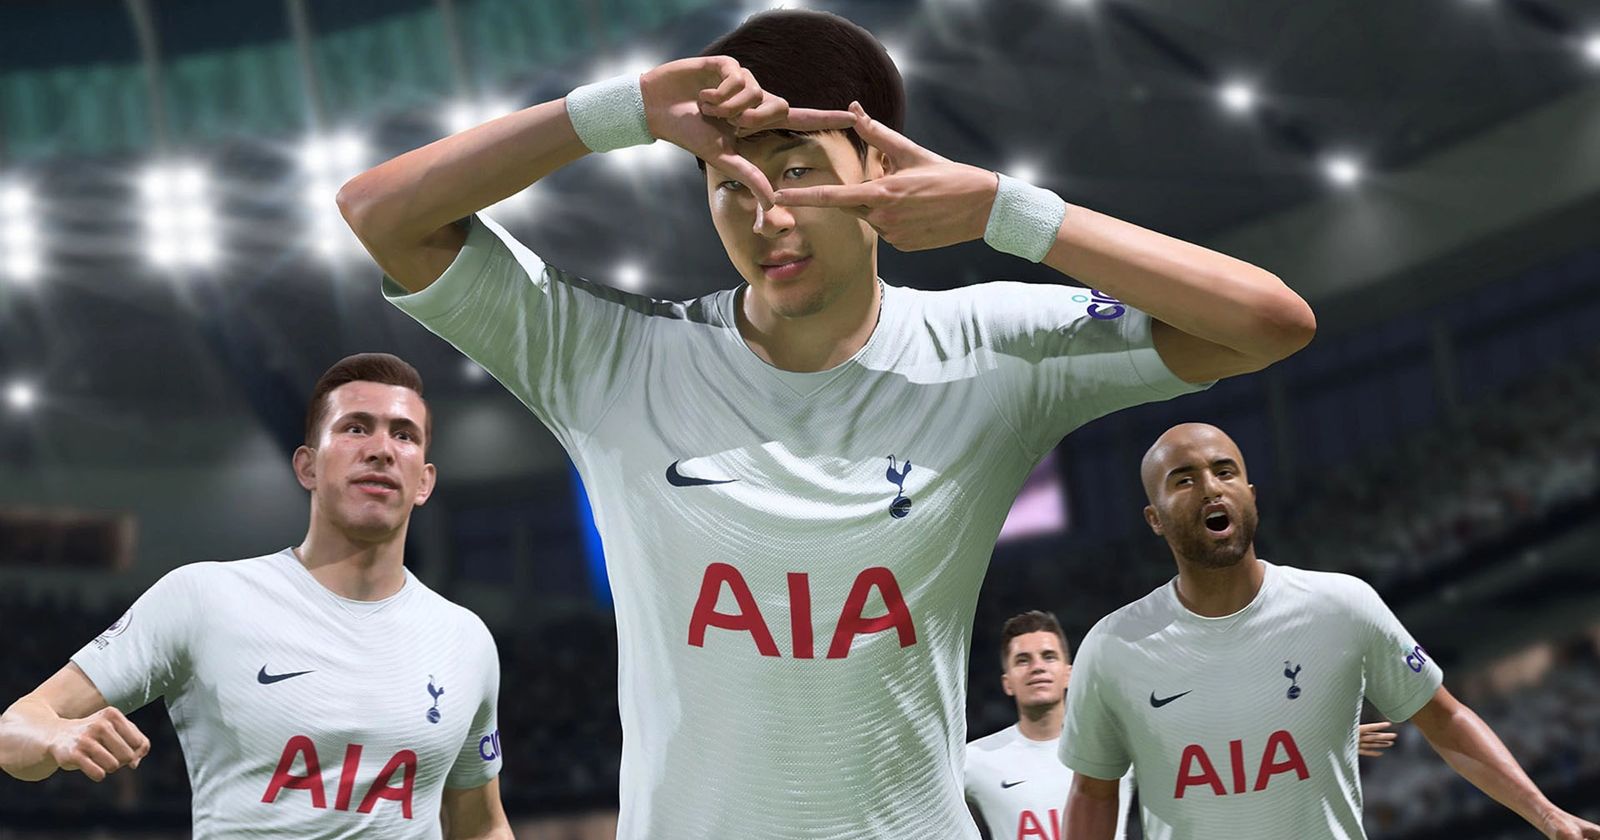 Football fans are only just realising easy trick to play EA FC 24 Ultimate  Team early – here's how